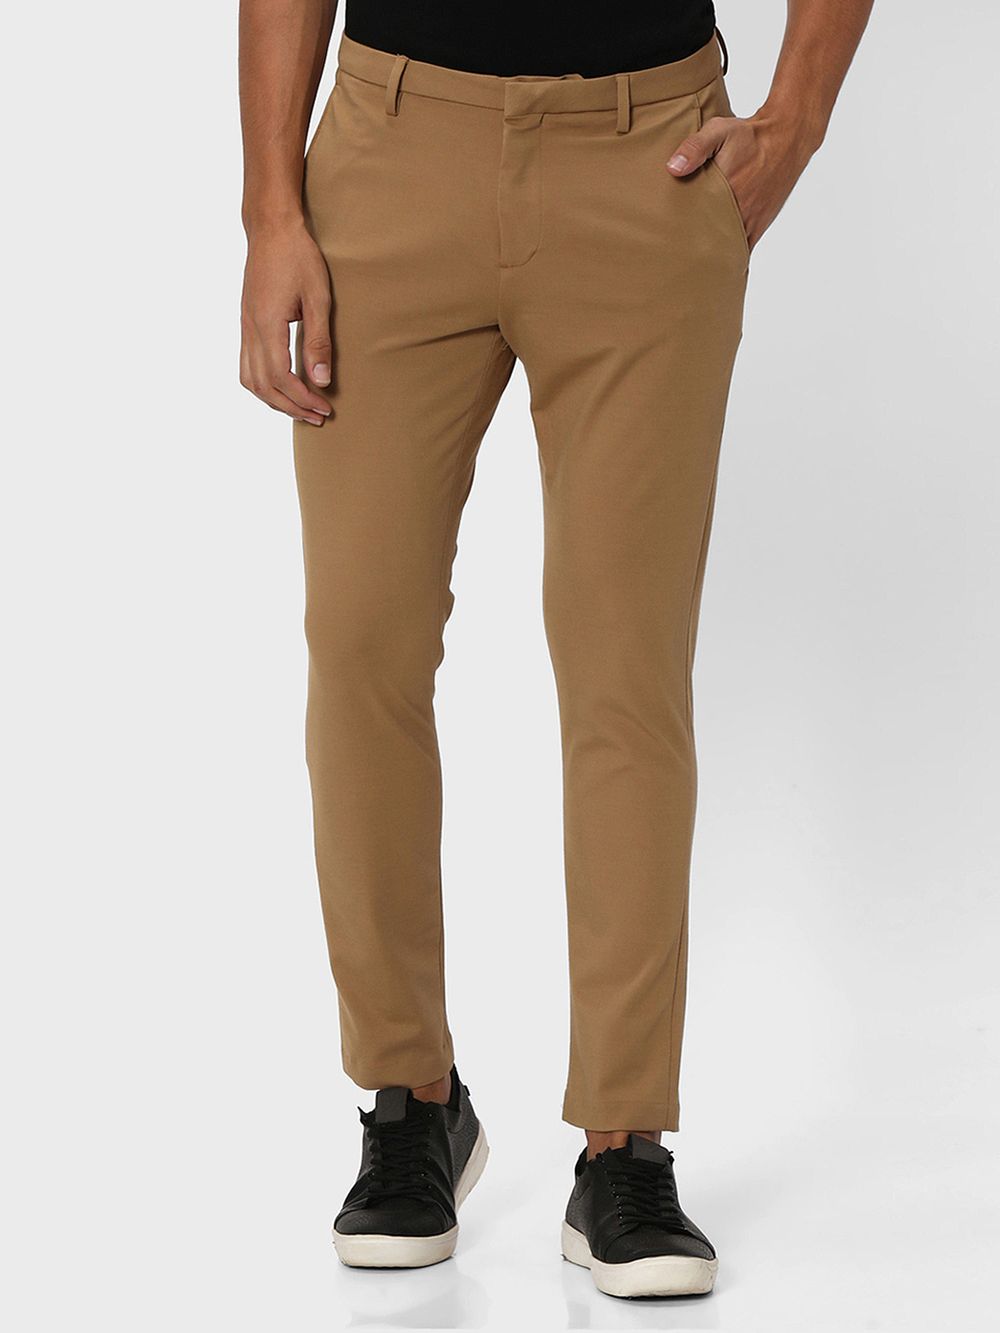 Khaki Ankle Length Stretch Chinos Trouser